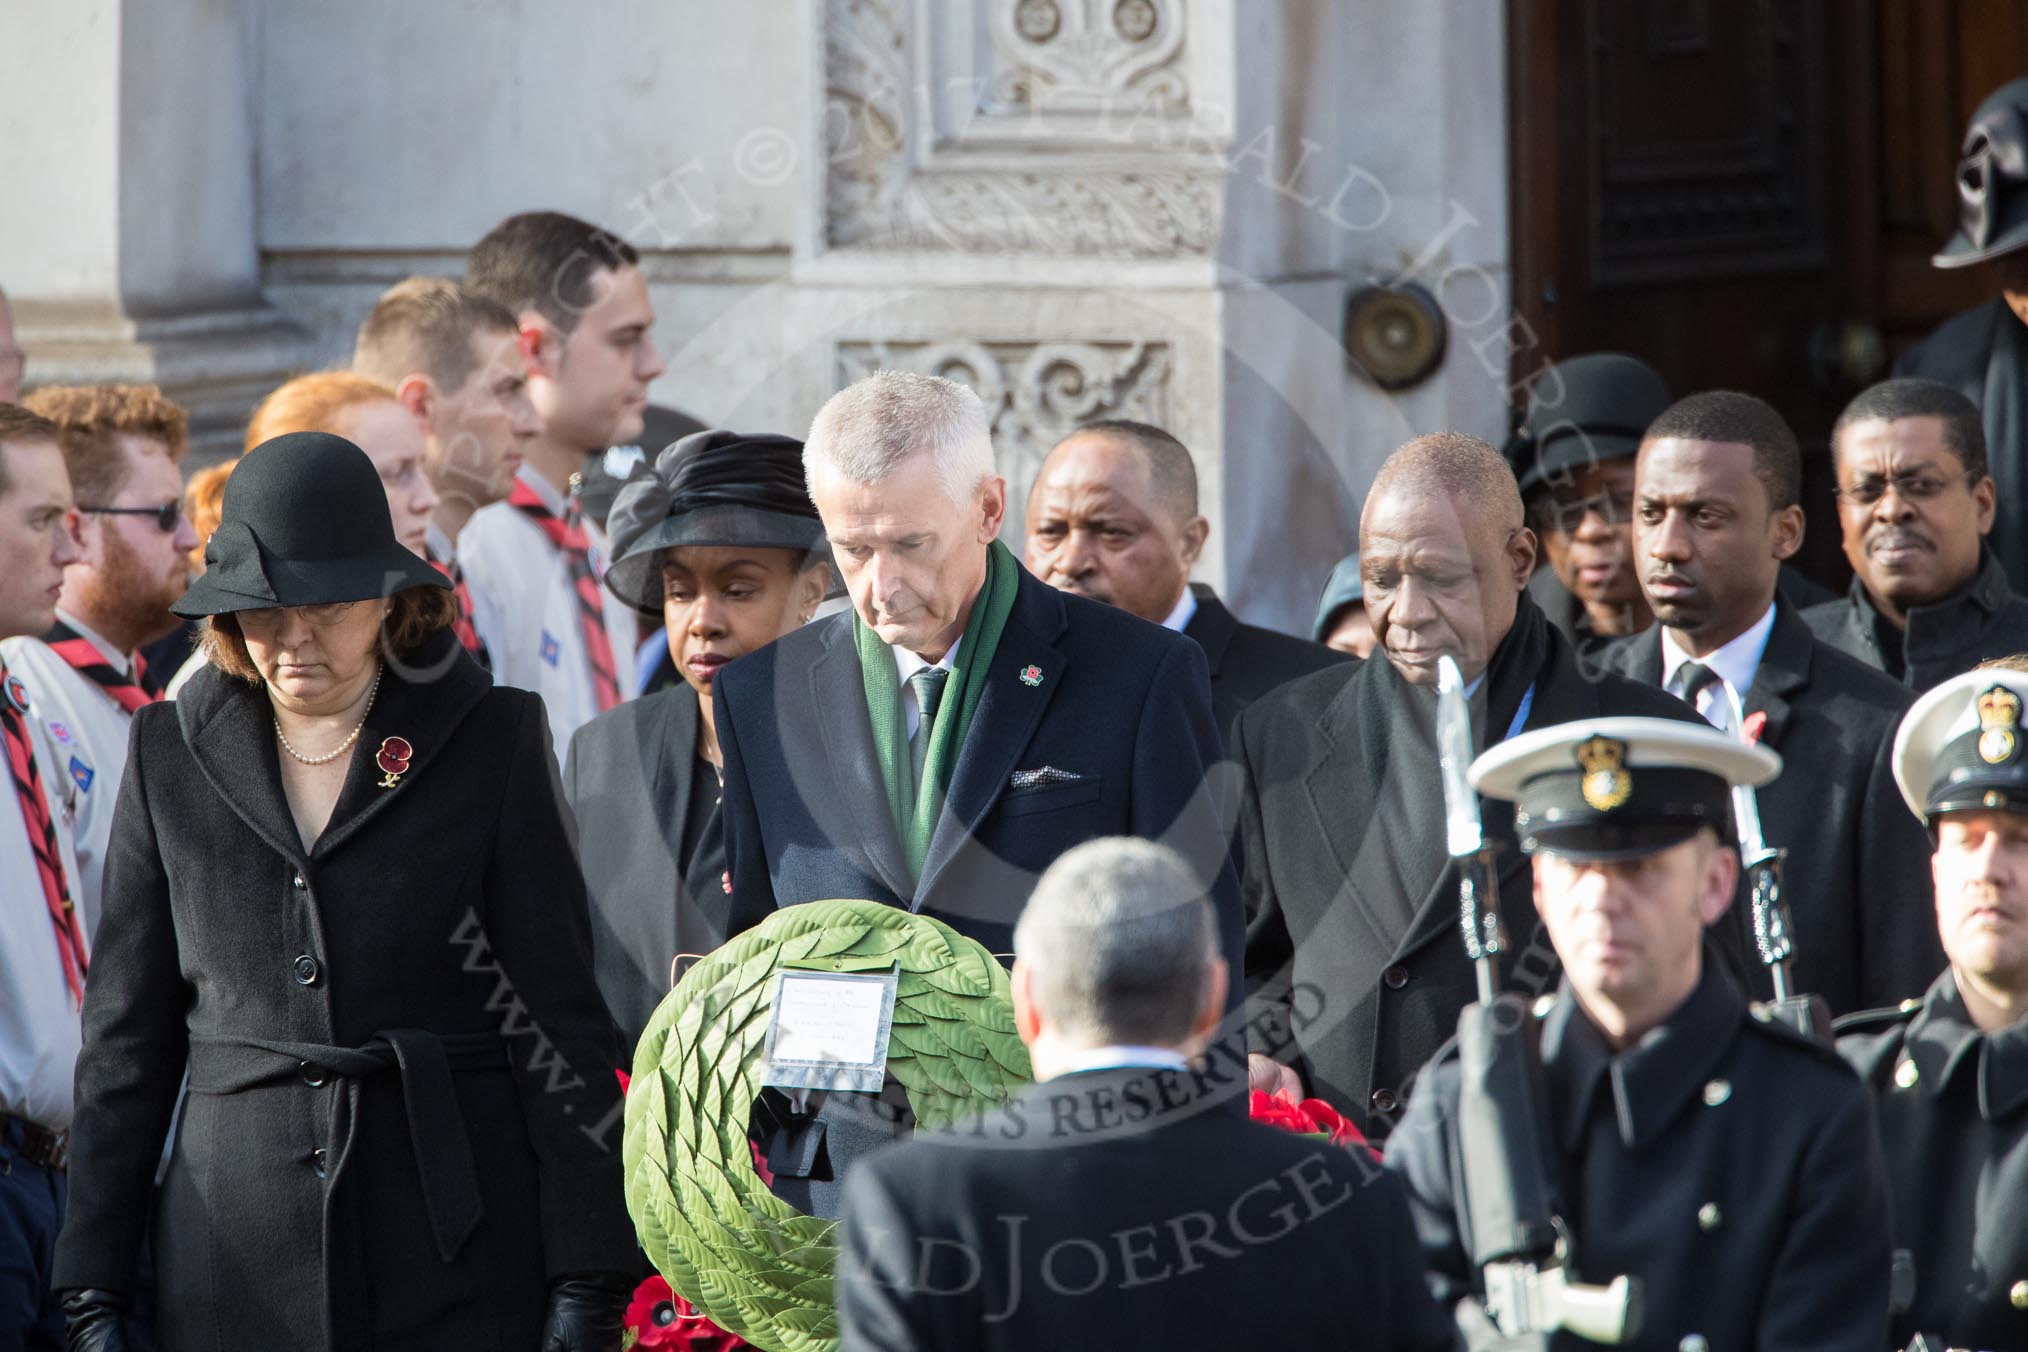 The High Commissioners are leaving the Foreign and Commonwealth Office during the  Remembrance Sunday Cenotaph Ceremony 2018 at Horse Guards Parade, Westminster, London, 11 November 2018, 10:55.